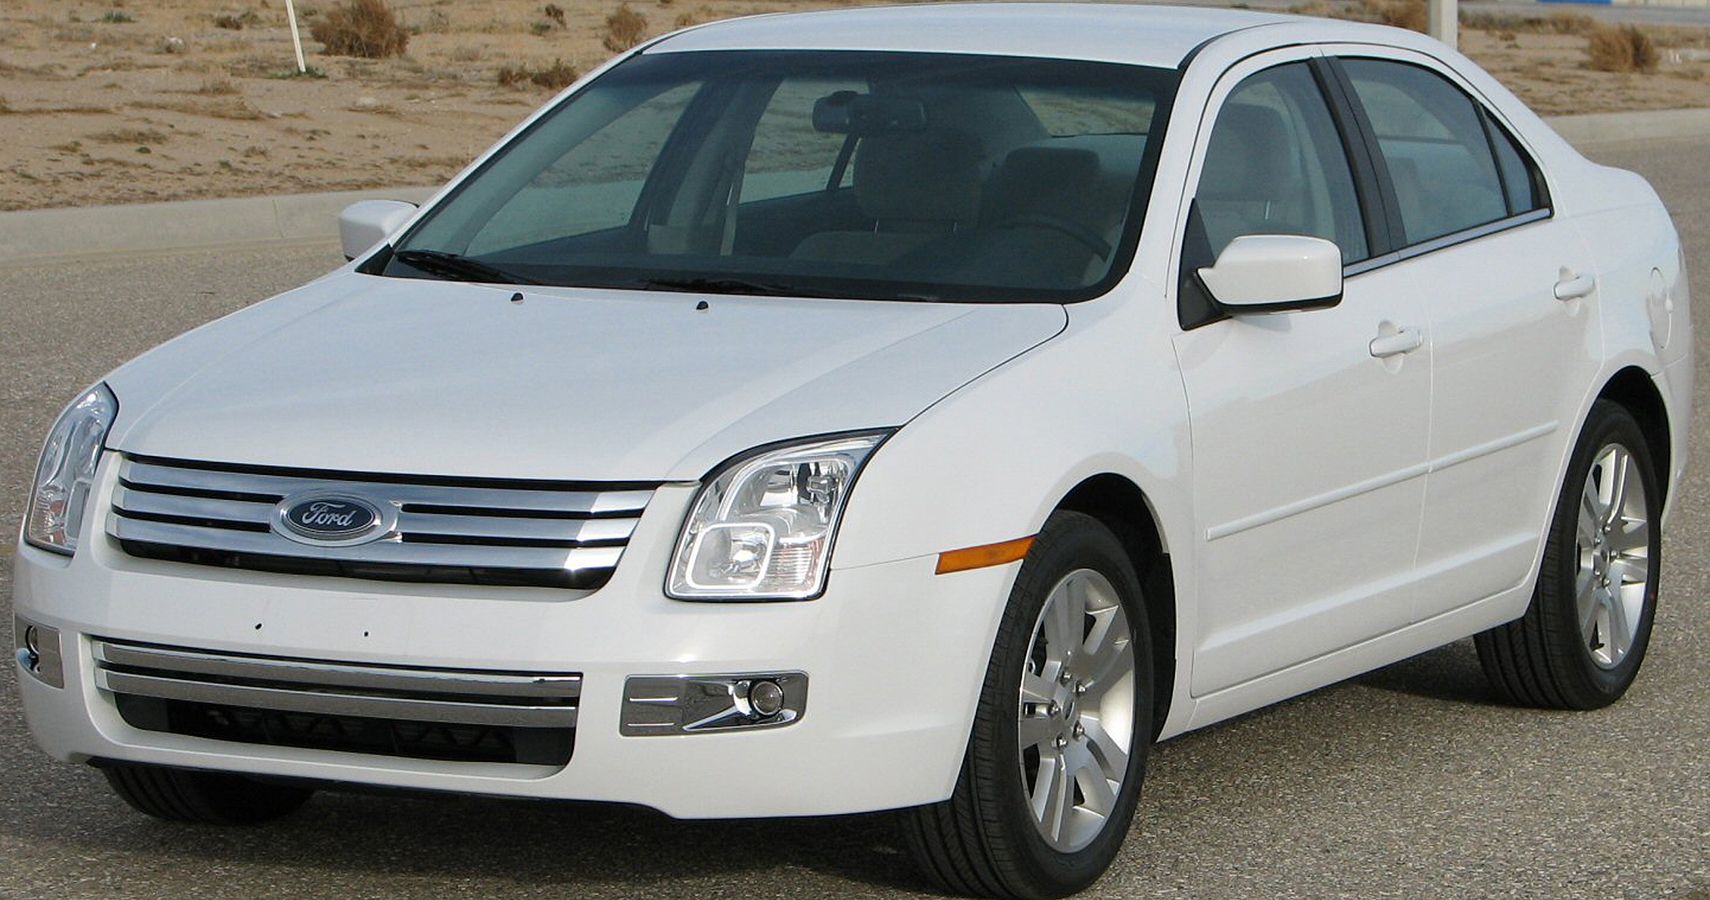 The Ultimate American Sedan: The Ford Fusion (2005-2020)